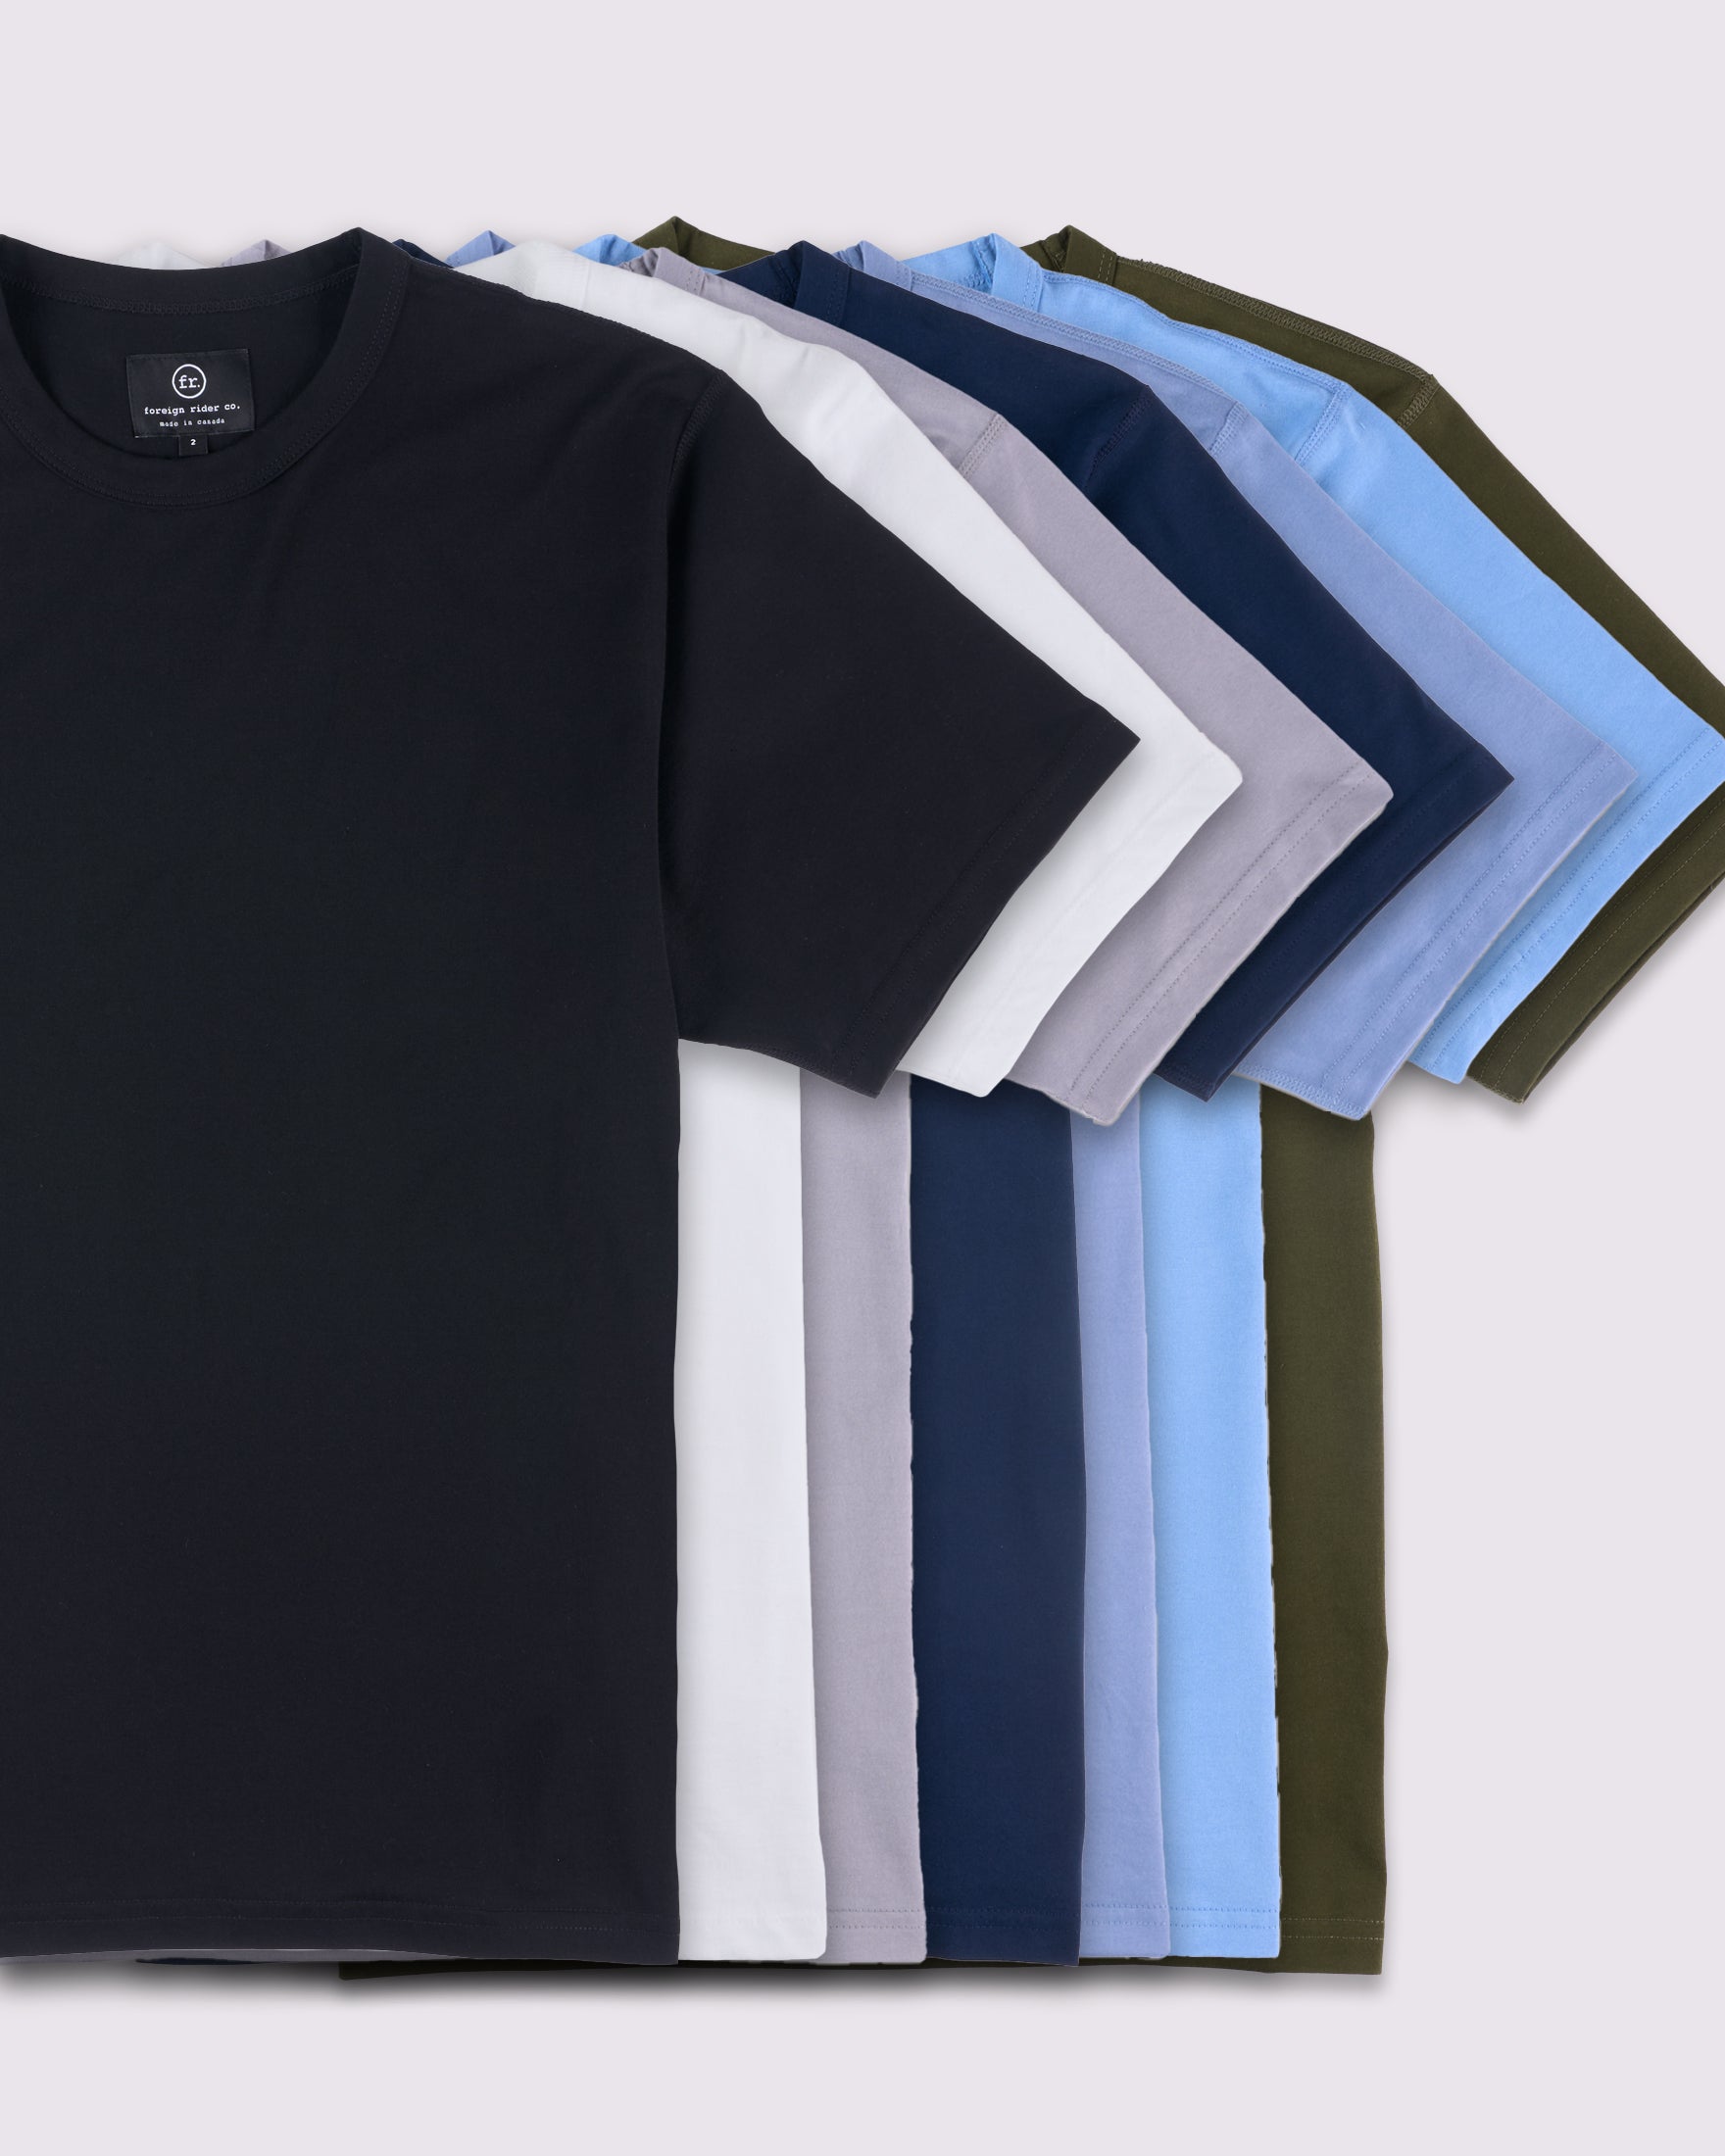 Cotton Supima T-Shirts laid flat on top of each other